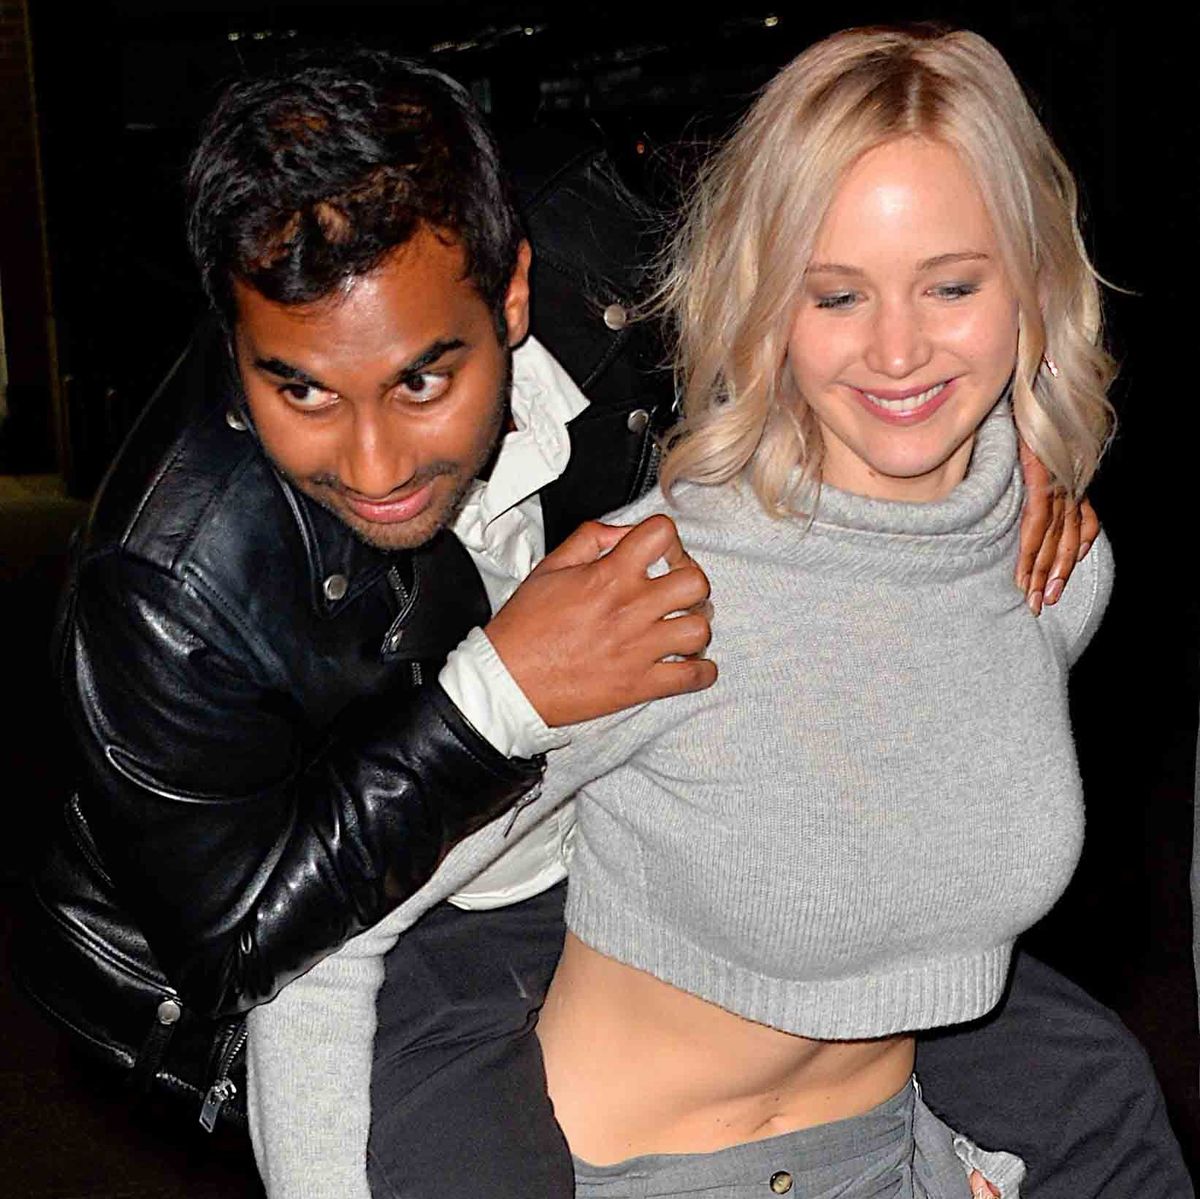 Jennifer was all laughs as she gave good friend Aziz Ansari a piggy-back ride when leaving the Wayfarer for the 'Saturday Night Live' after party in NYC.
<br>
Photo: Getty Images